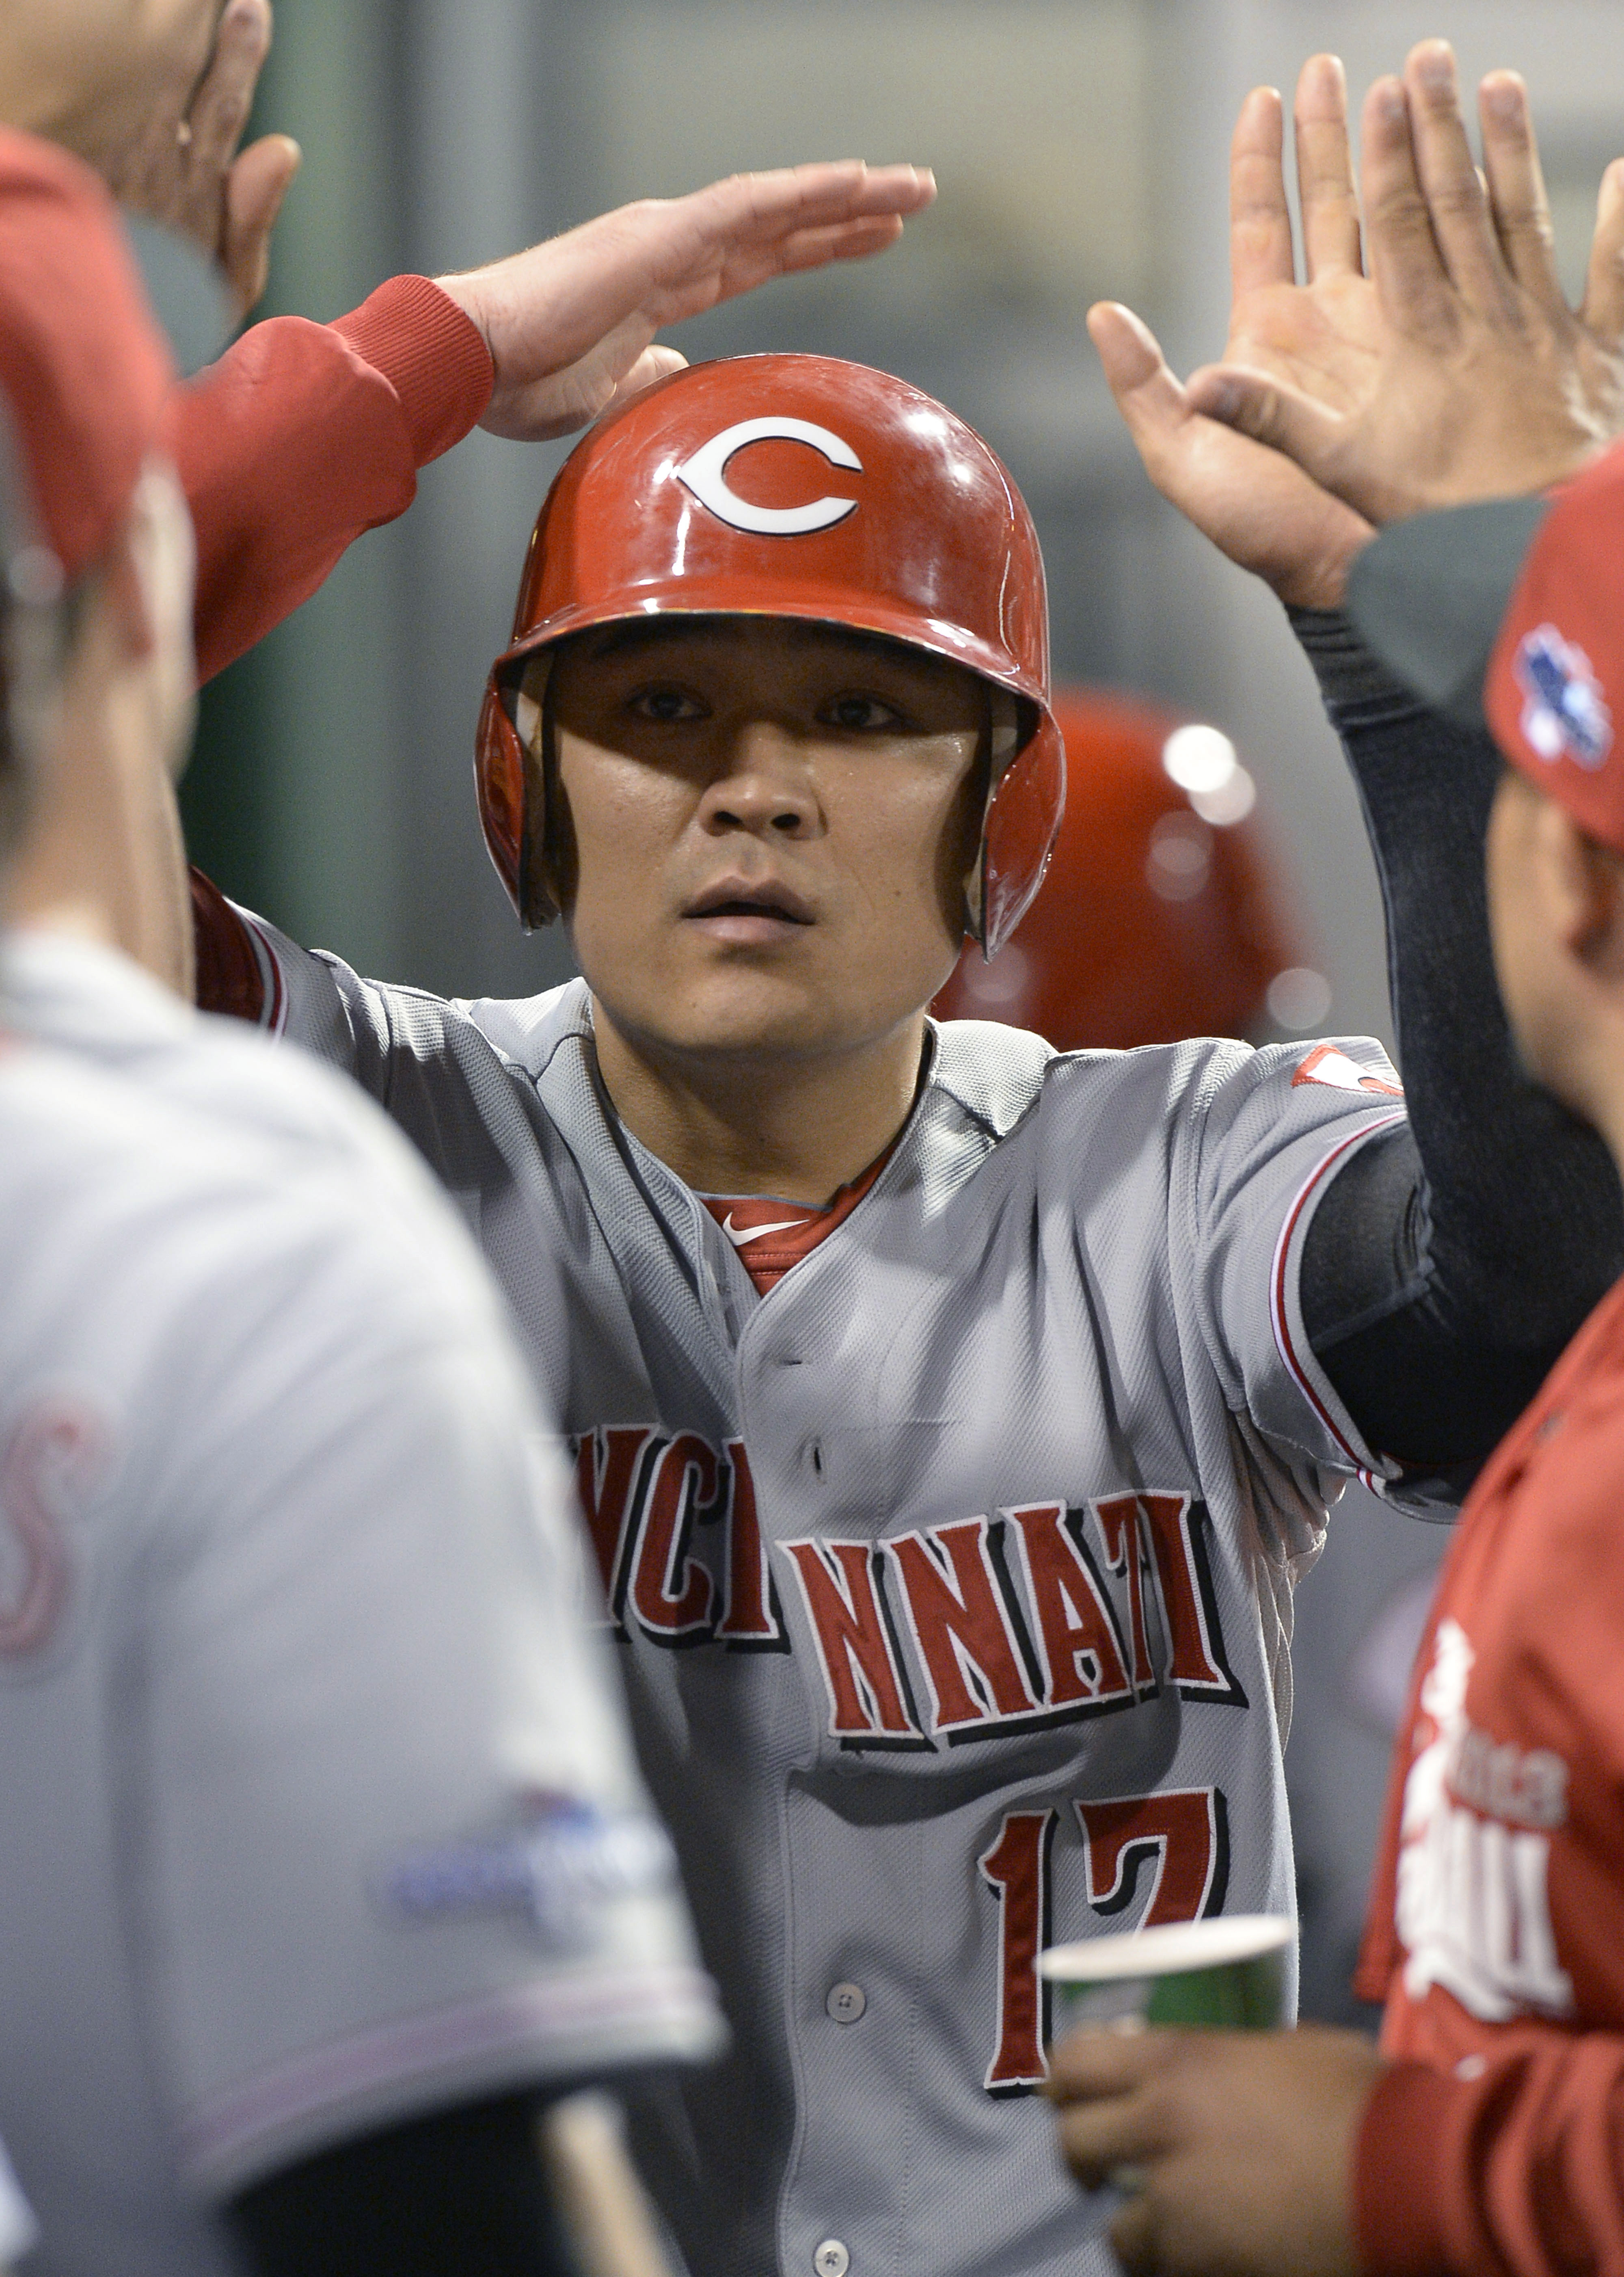 Cincinnati Reds' Shin-Soo Choo (17) is greeted by teammates in the dugout after scoring in the fourth inning of the NL wild-card playoff baseball game against the Pittsburgh Pirates on Tuesday, Oct. 1, 2013, in Pittsburgh. (AP Photo/Don Wright)